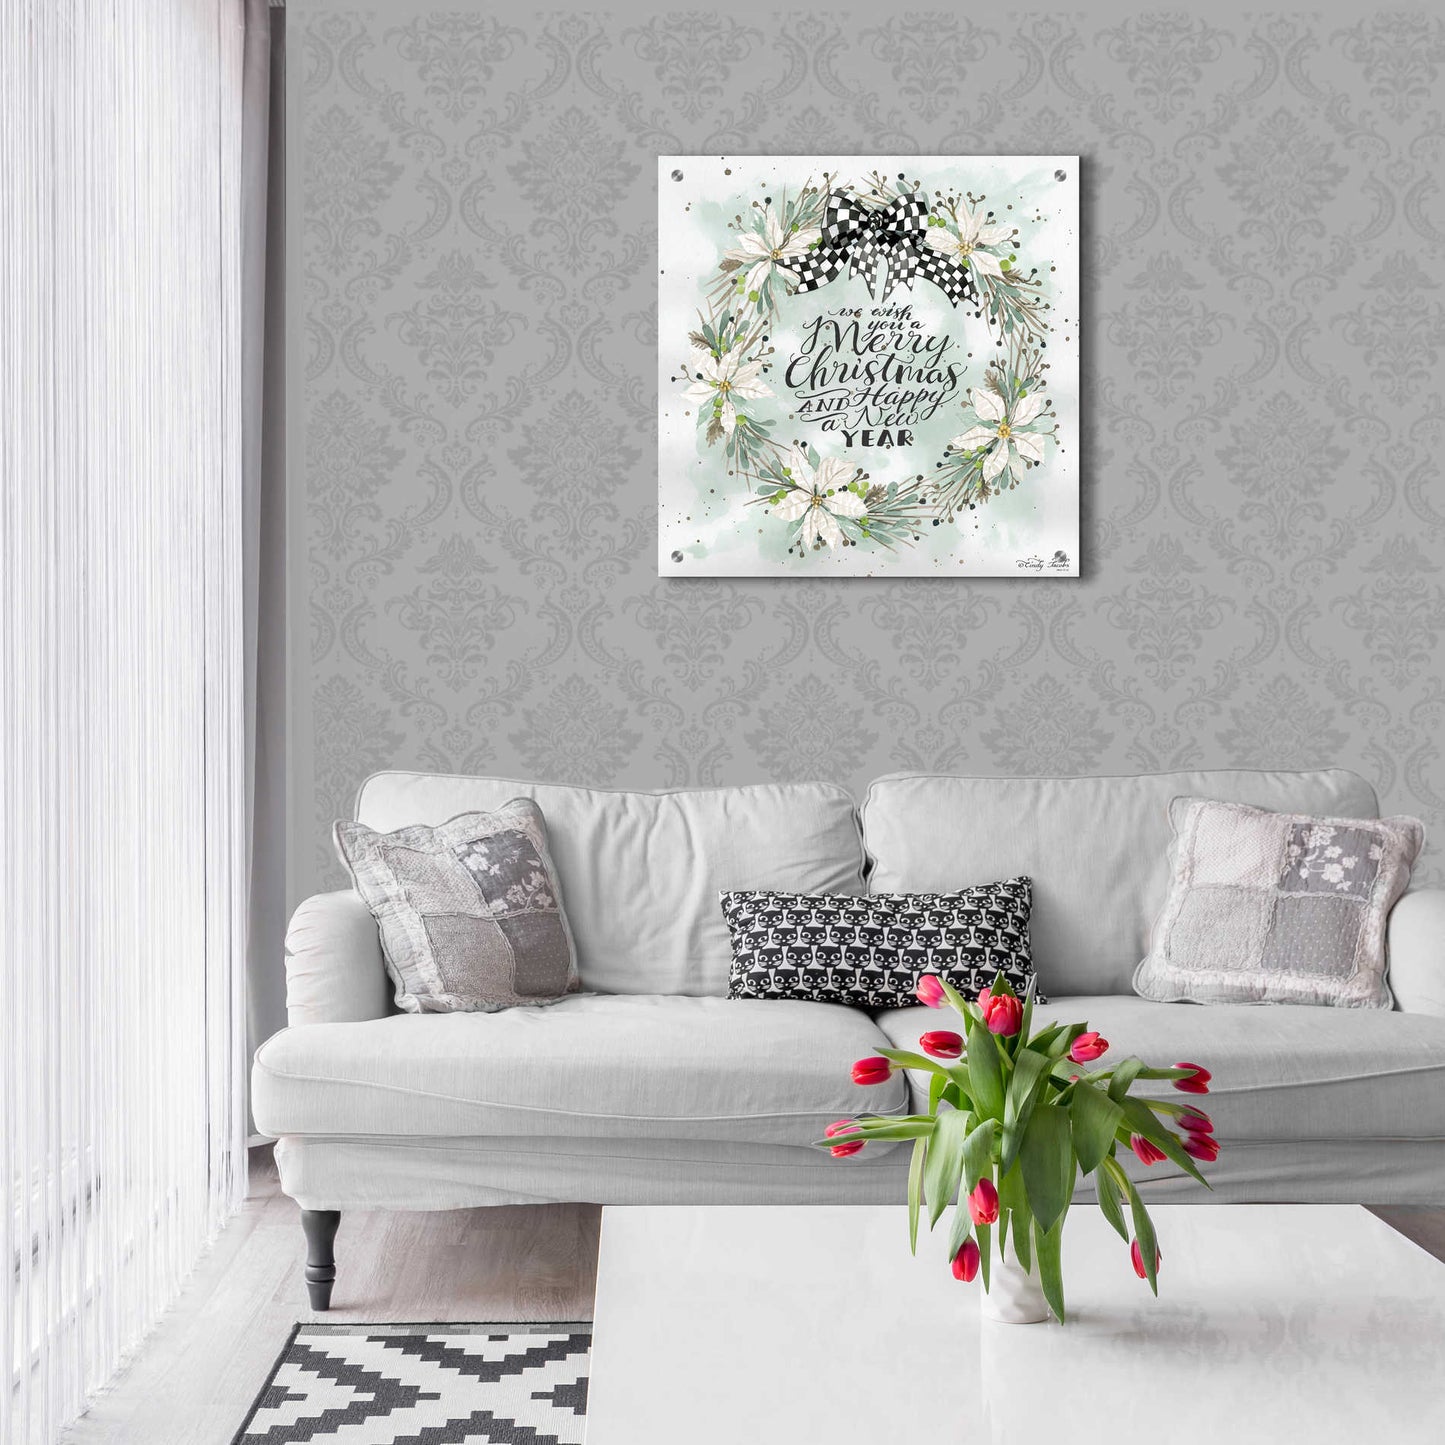 Epic Art 'We Wish You a Merry Christmas' by Cindy Jacobs, Acrylic Glass Wall Art,24x24